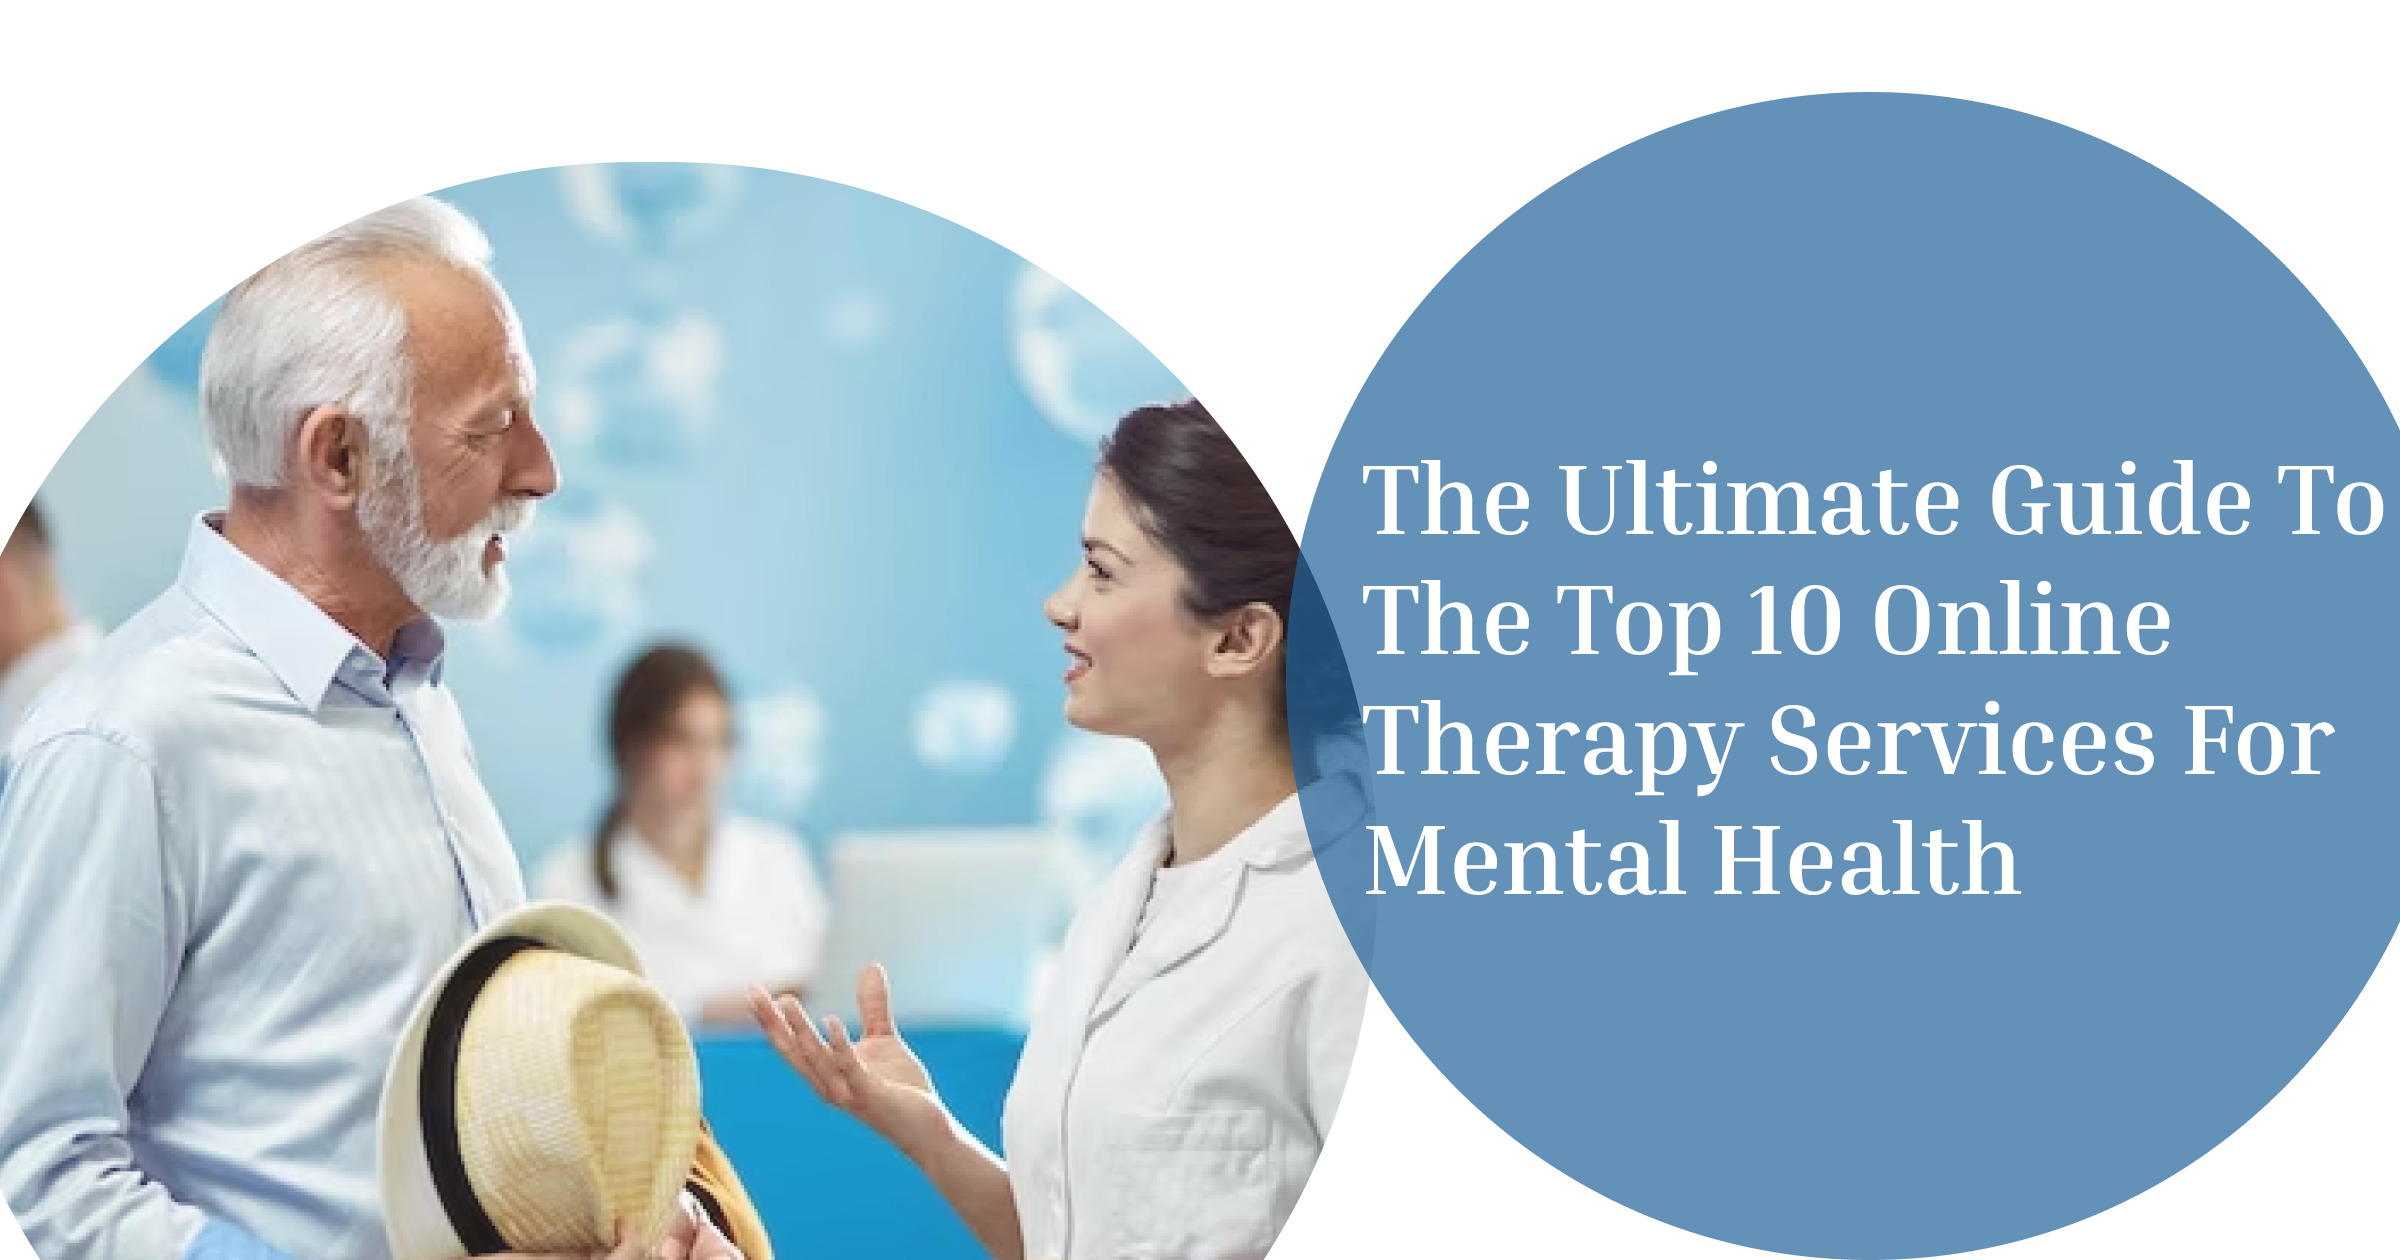 The Ultimate Guide To The Top 10 Online Therapy Services For Mental Health